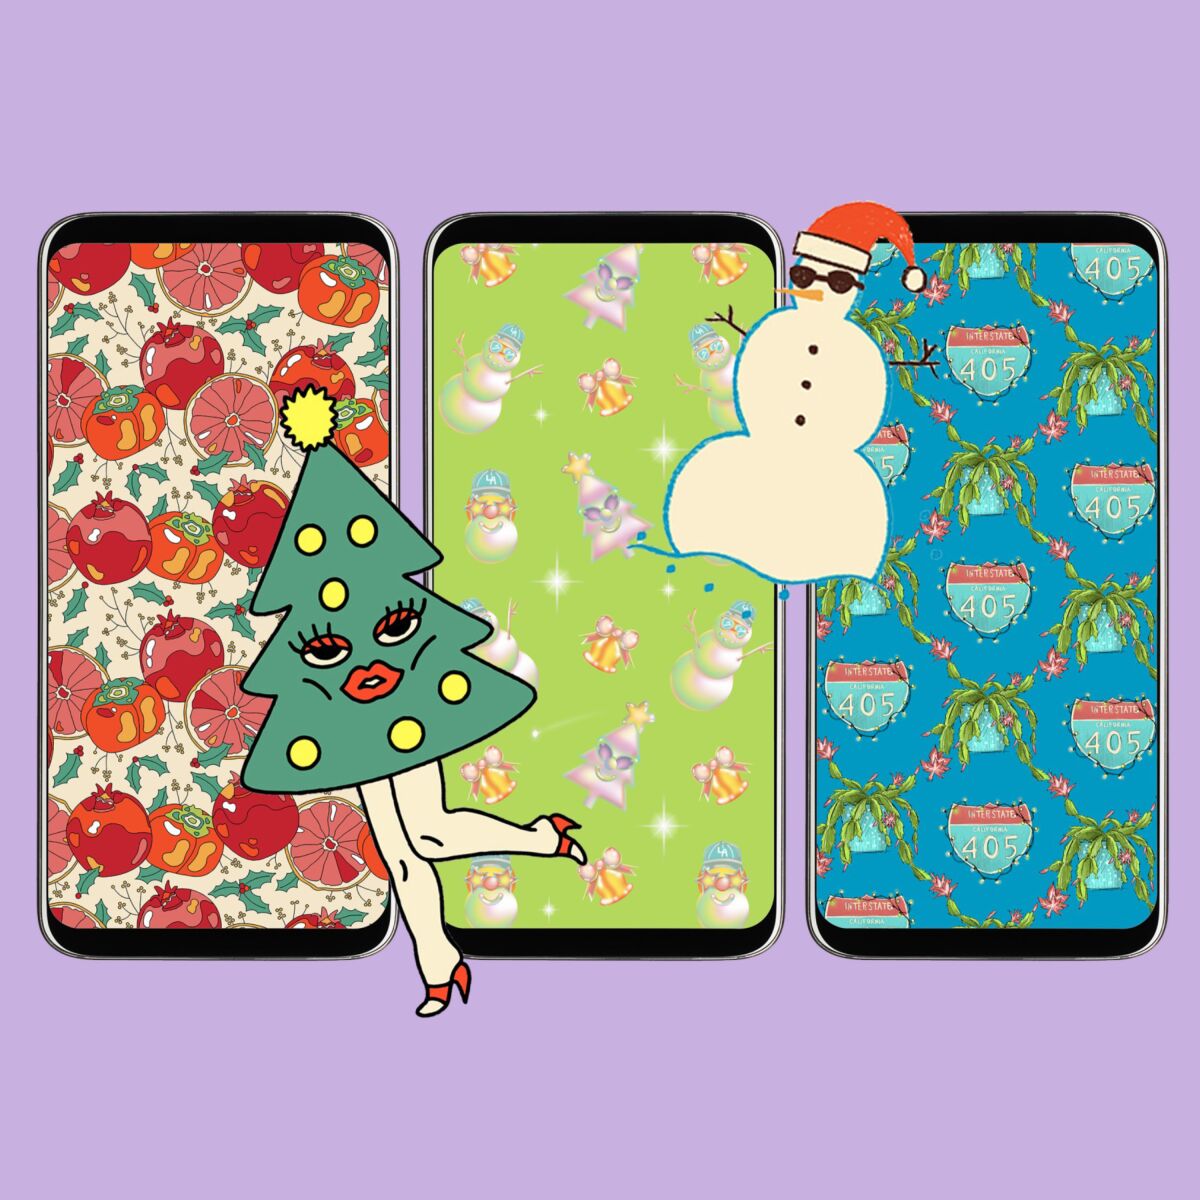 An illustration shows cellphones with decorative backgrounds, and a Christmas tree with face and legs.